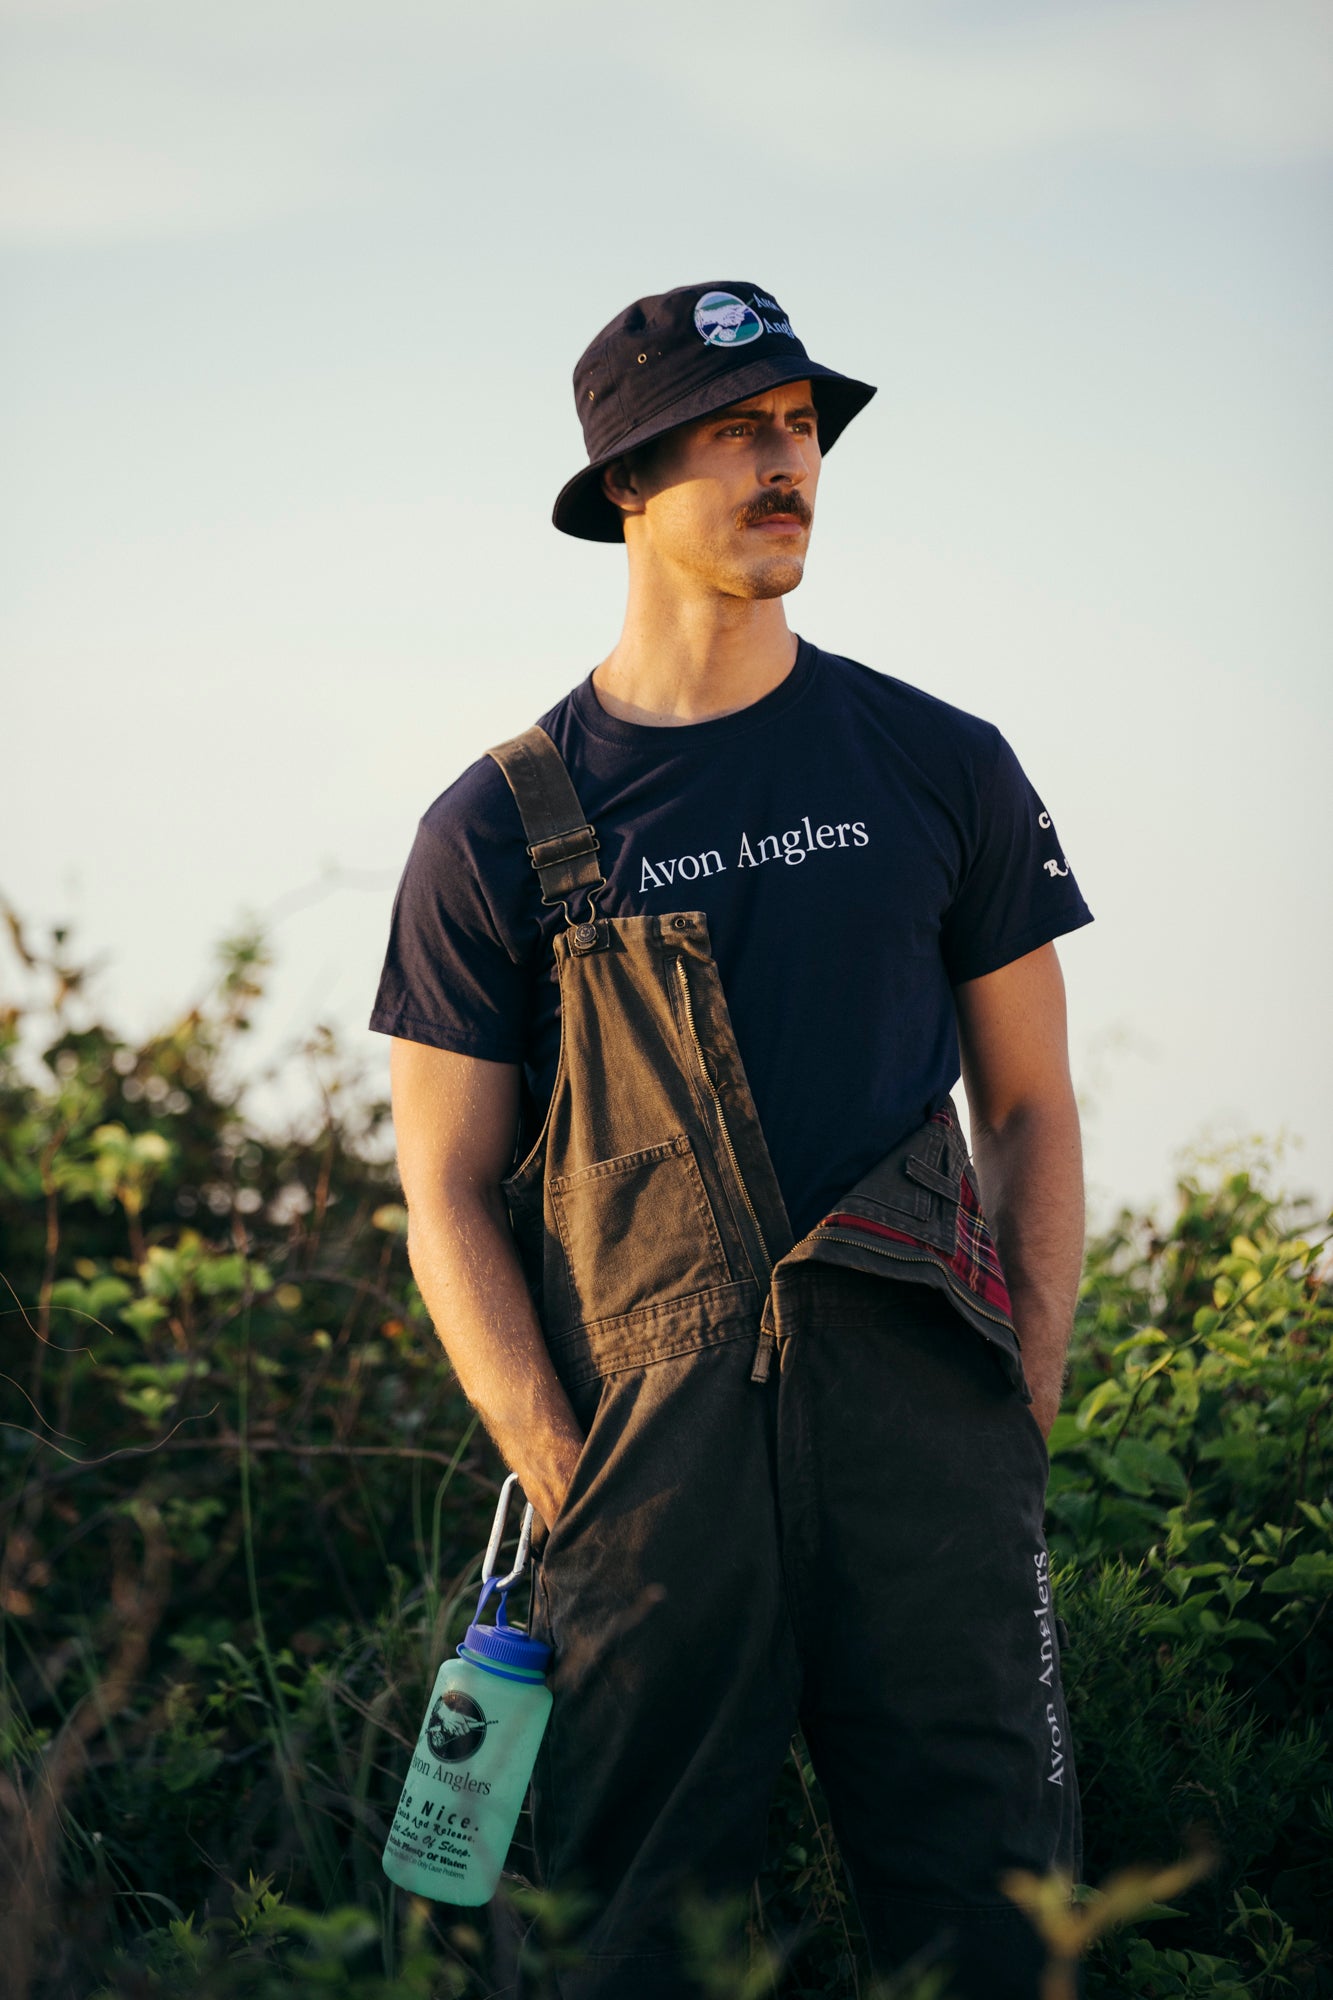 Model Nico Brown wearing Avon Anglers bucket hat, navy short sleeve t-shirt, re-wear bib front overalls with a Glow in the dark Nalgene bottle clipped to the coveralls